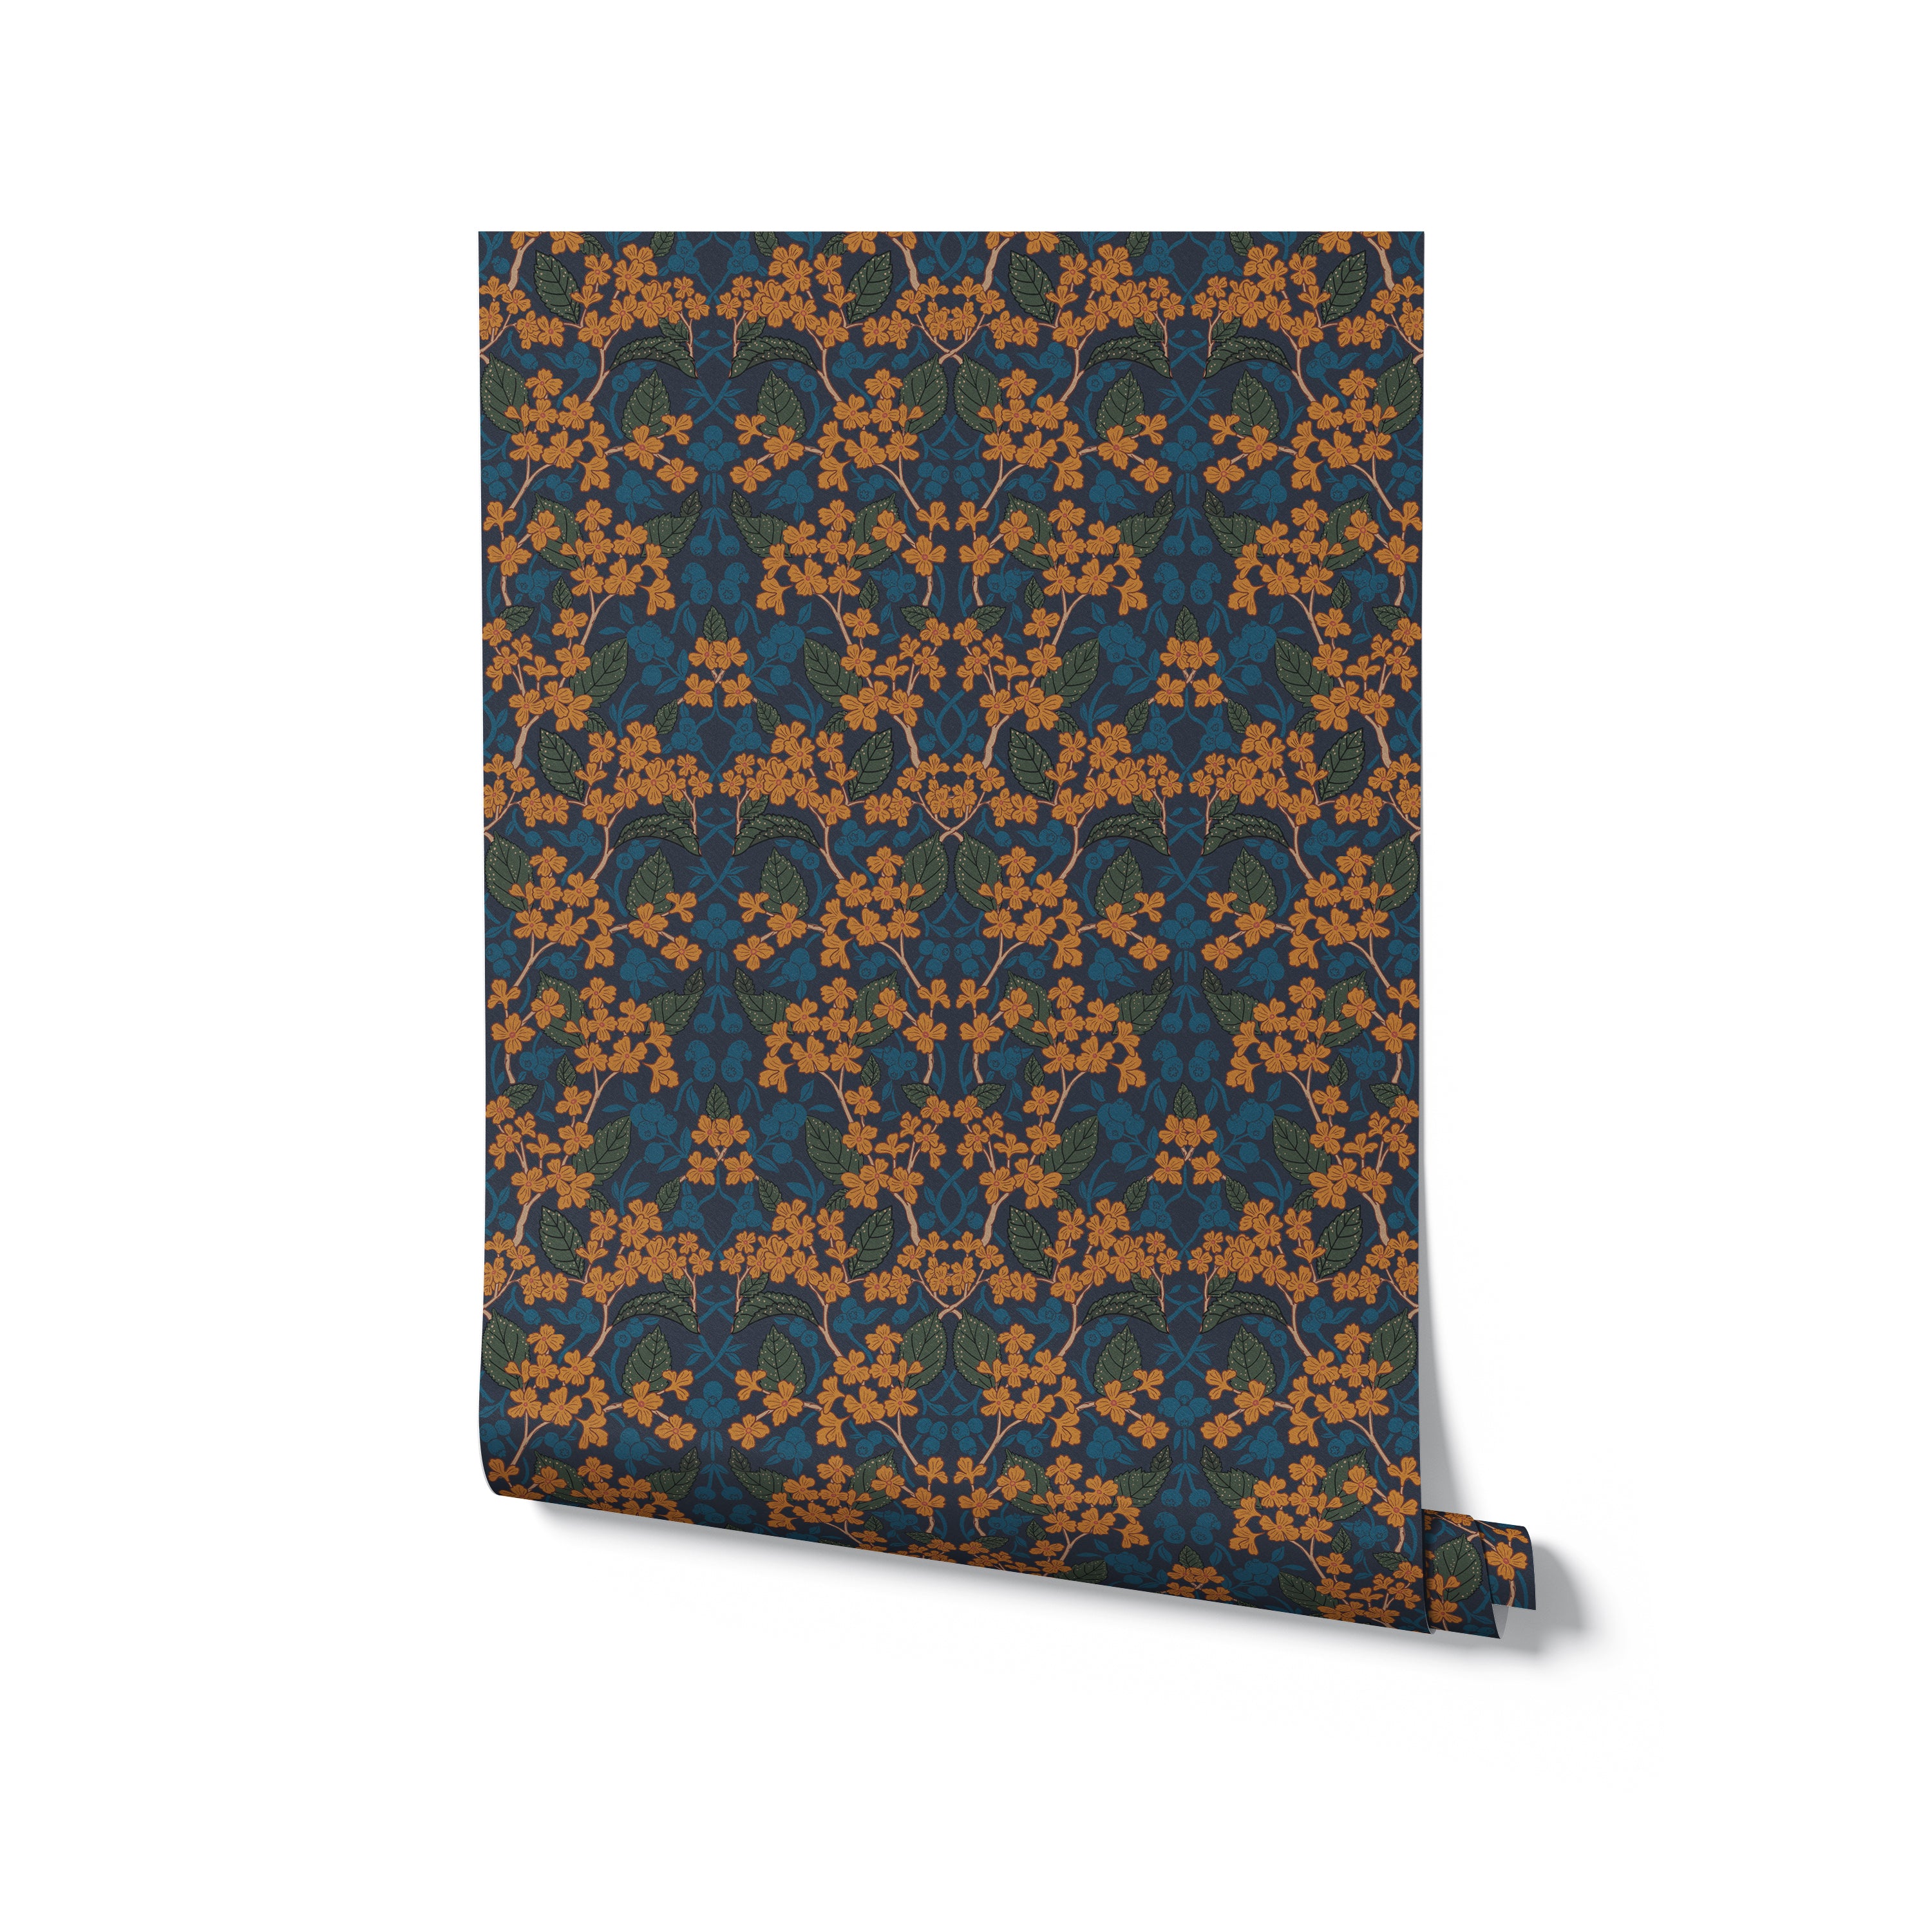 A roll of Autumn Boho wallpaper displayed vertically, showcasing a detailed floral pattern in a harmonious blend of deep blue and vibrant orange, ideal for adding a statement to any room decor